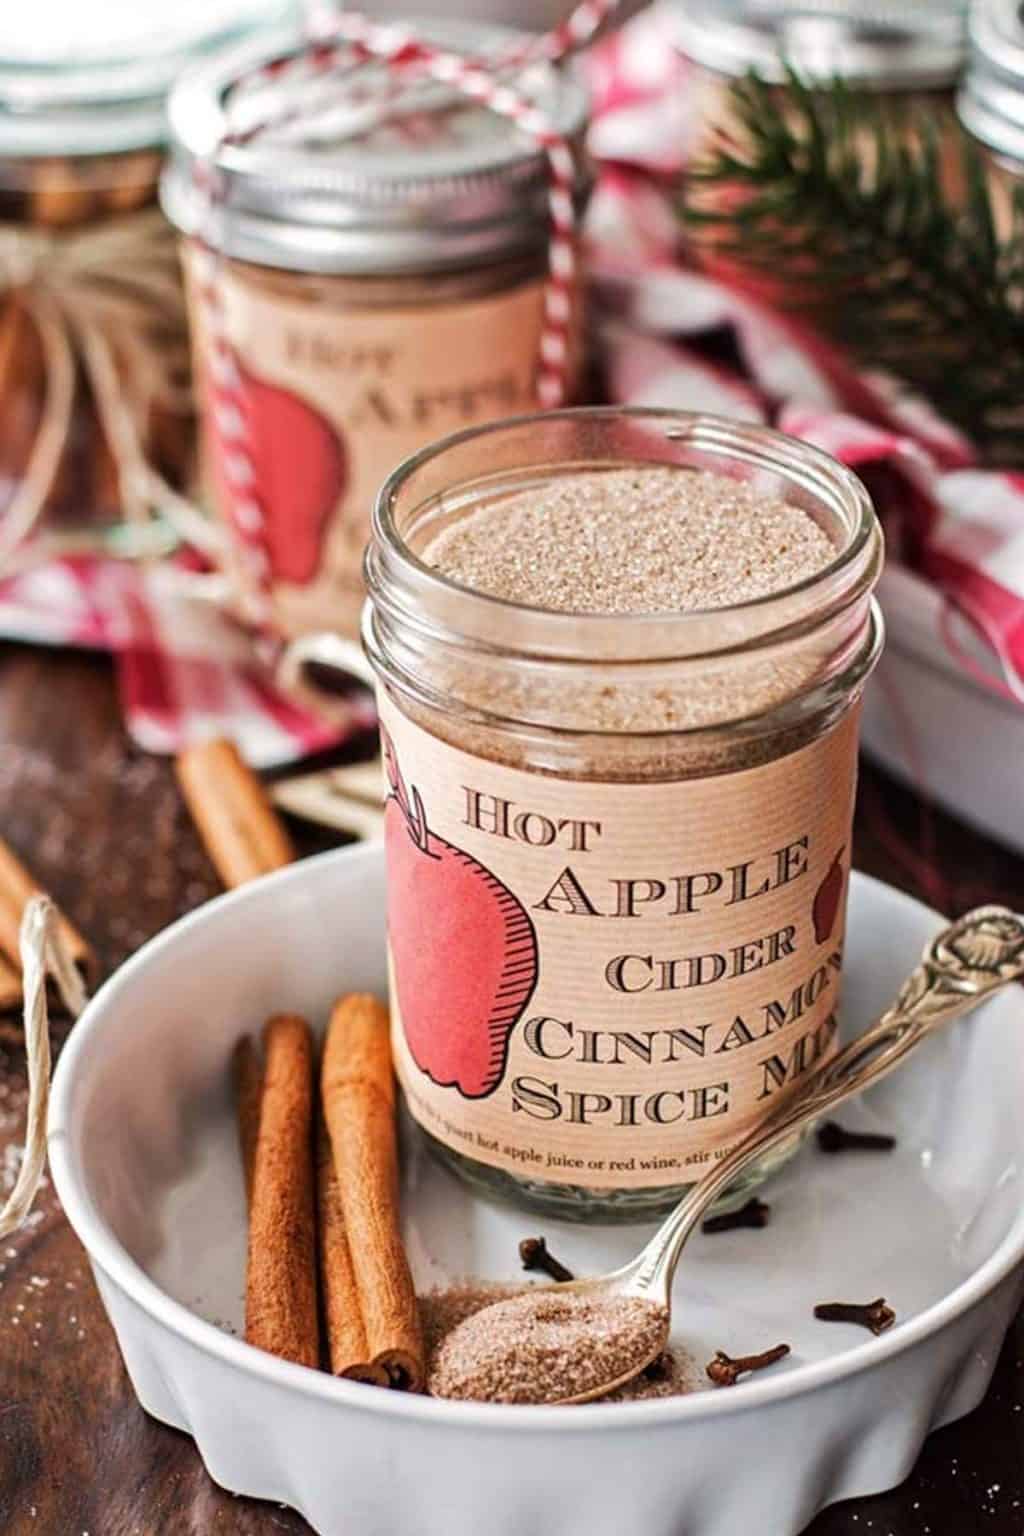 Hot Apple Cider Cinnamon Spice Mix - Easy DIY Holiday Gift